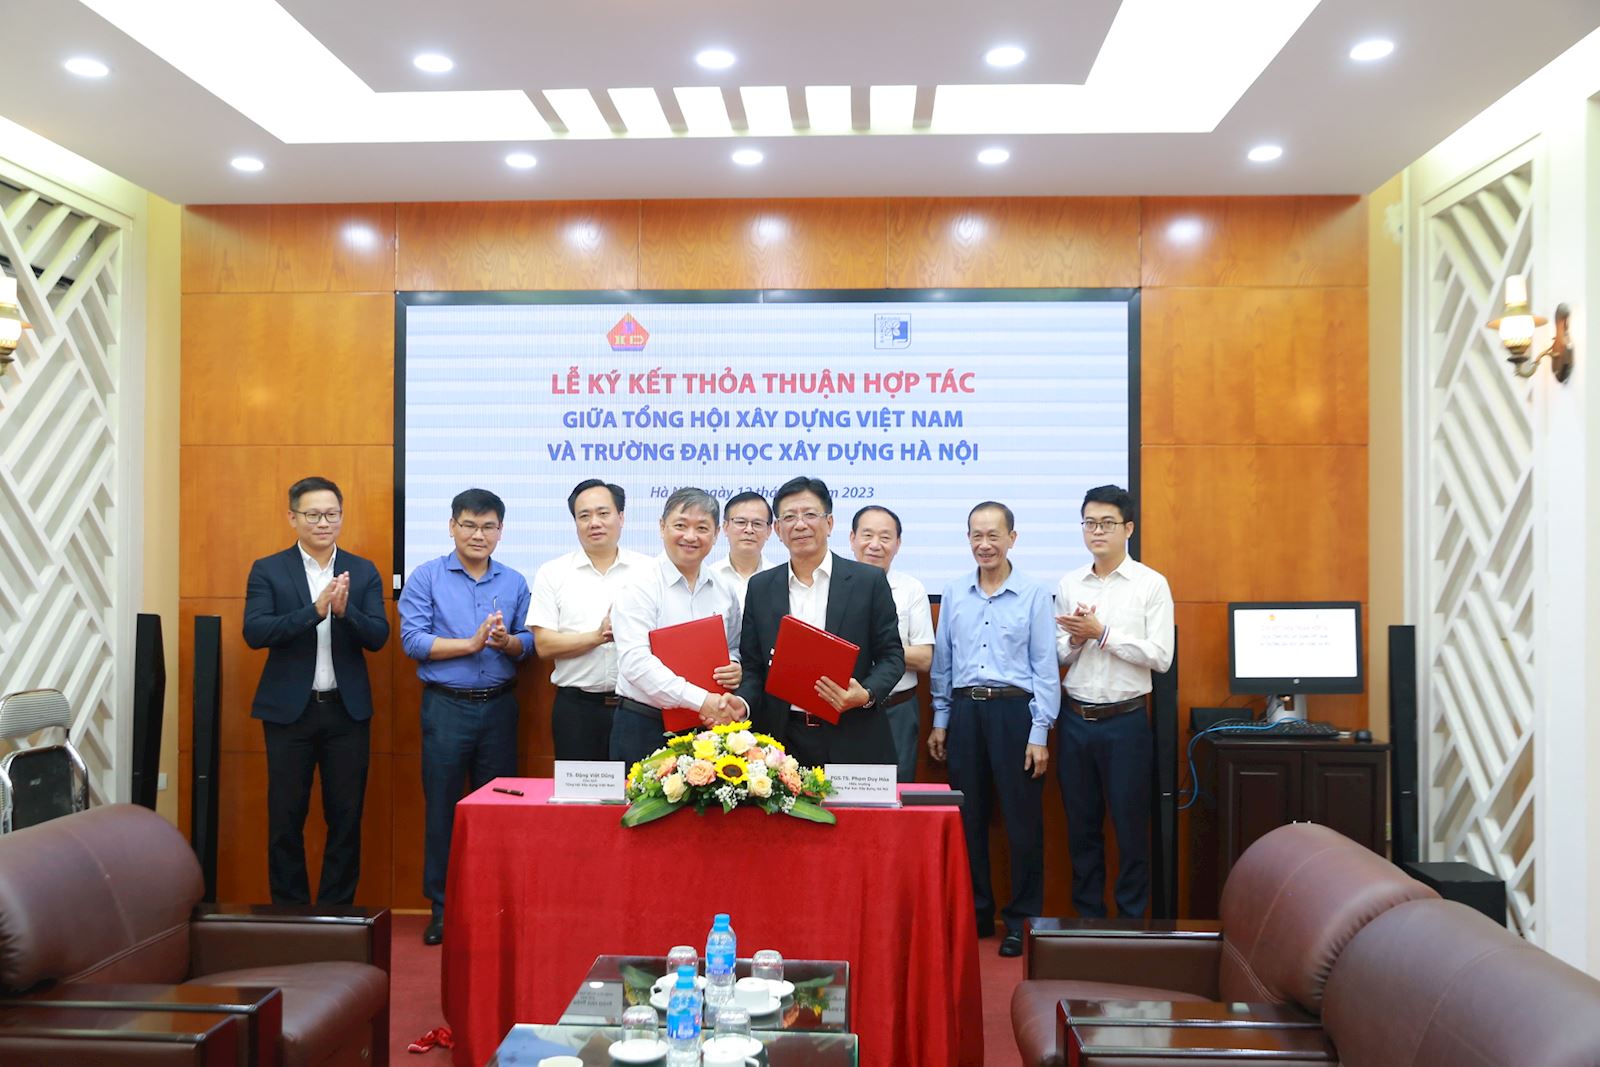 SIGNING CEREMONY OF COOPERATION AGREEMENT BETWEEN HANOI UNIVERSITY OF CIVIL ENGINEERING AND VIETNAM CONSTRUCTION GENERAL ASSOCIATION